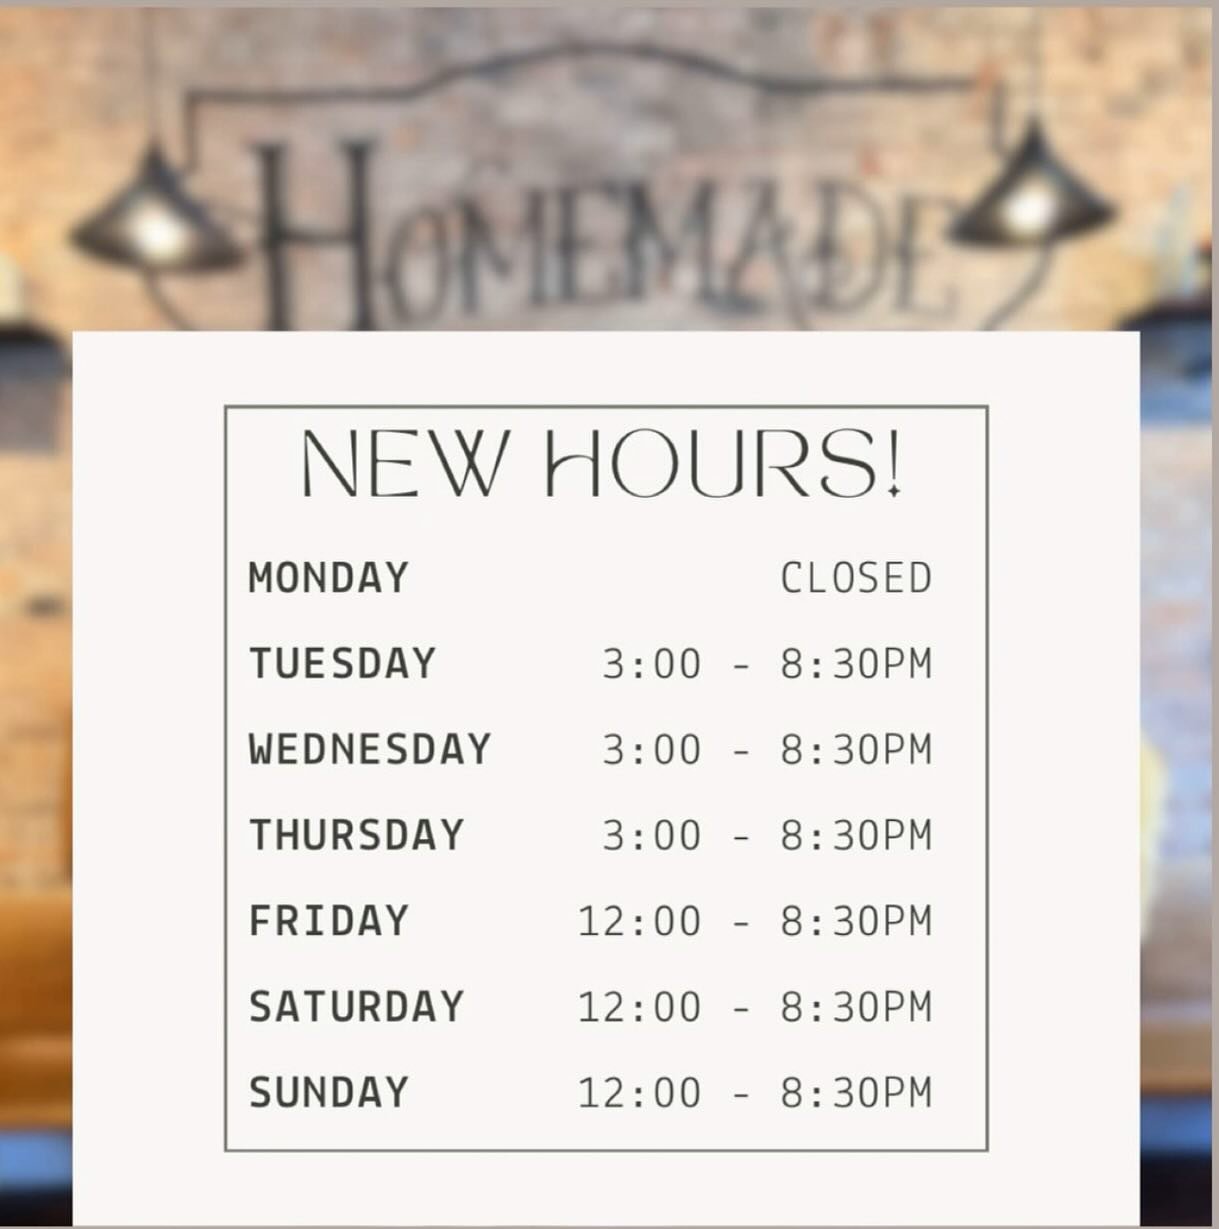 We are now open 6 days a week with adding Sundays!